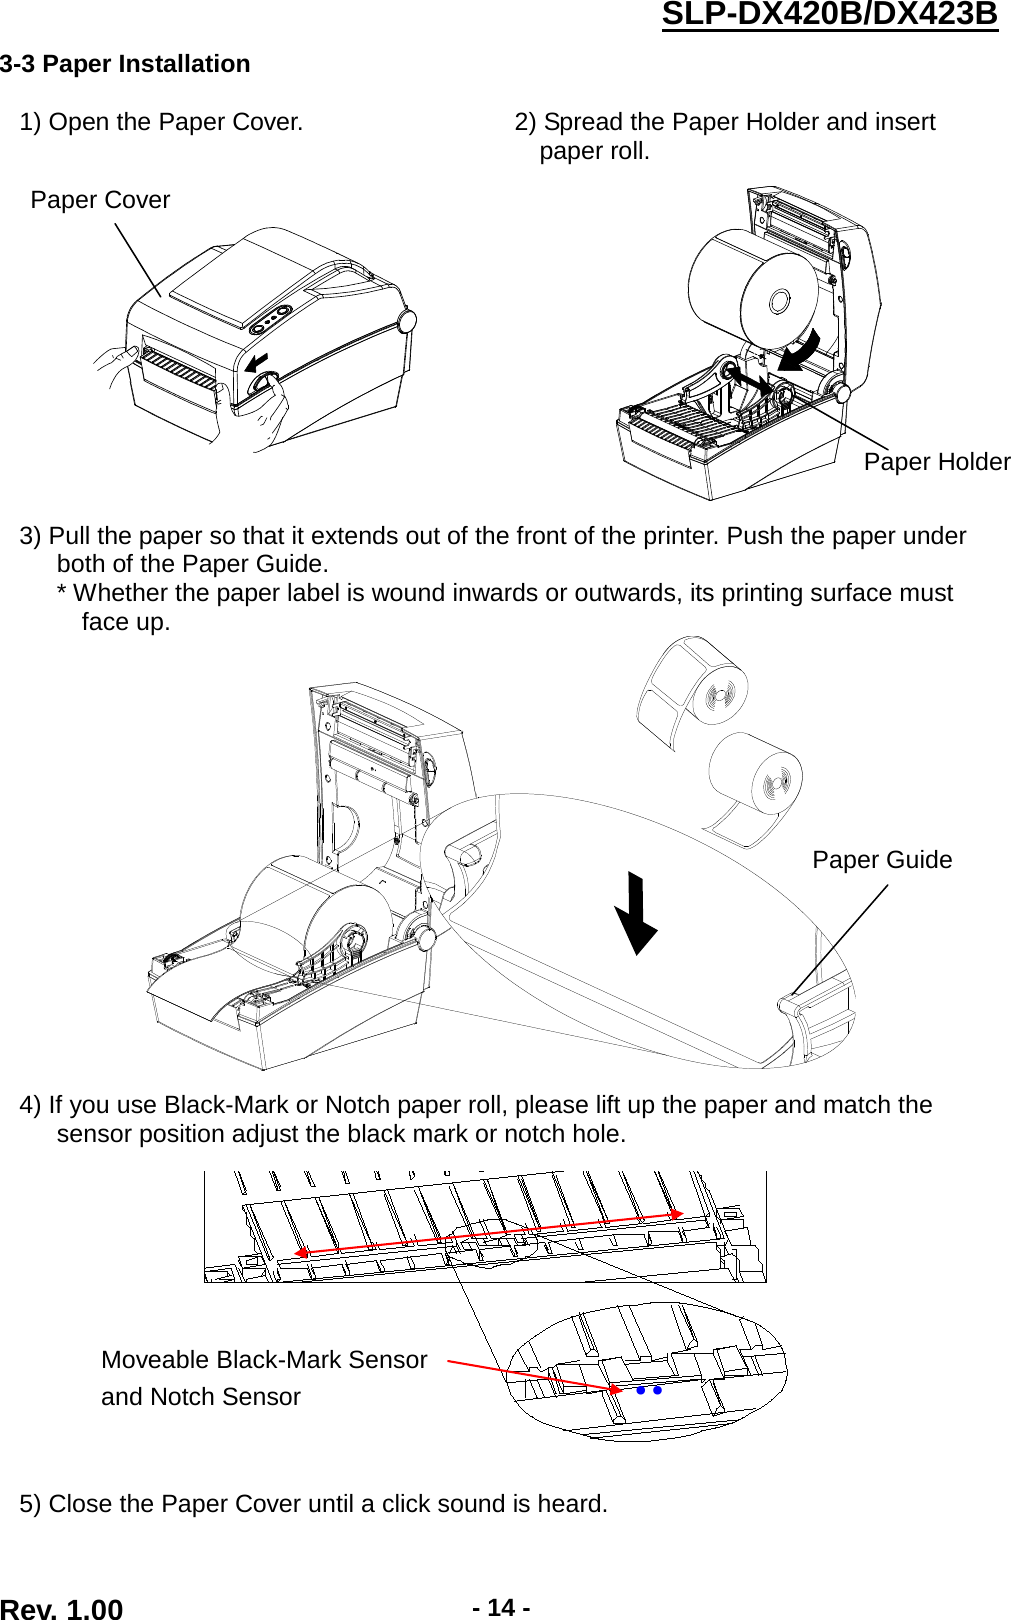  Rev. 1.00 - 14 - SLP-DX420B/DX423B  3-3 Paper Installation  1) Open the Paper Cover. 2) Spread the Paper Holder and insert paper roll.      3) Pull the paper so that it extends out of the front of the printer. Push the paper under both of the Paper Guide.    * Whether the paper label is wound inwards or outwards, its printing surface must face up.    4) If you use Black-Mark or Notch paper roll, please lift up the paper and match the sensor position adjust the black mark or notch hole.    5) Close the Paper Cover until a click sound is heard. Moveable Black-Mark Sensor and Notch Sensor ●   ●   Paper Guide Paper Cover Paper Holder 